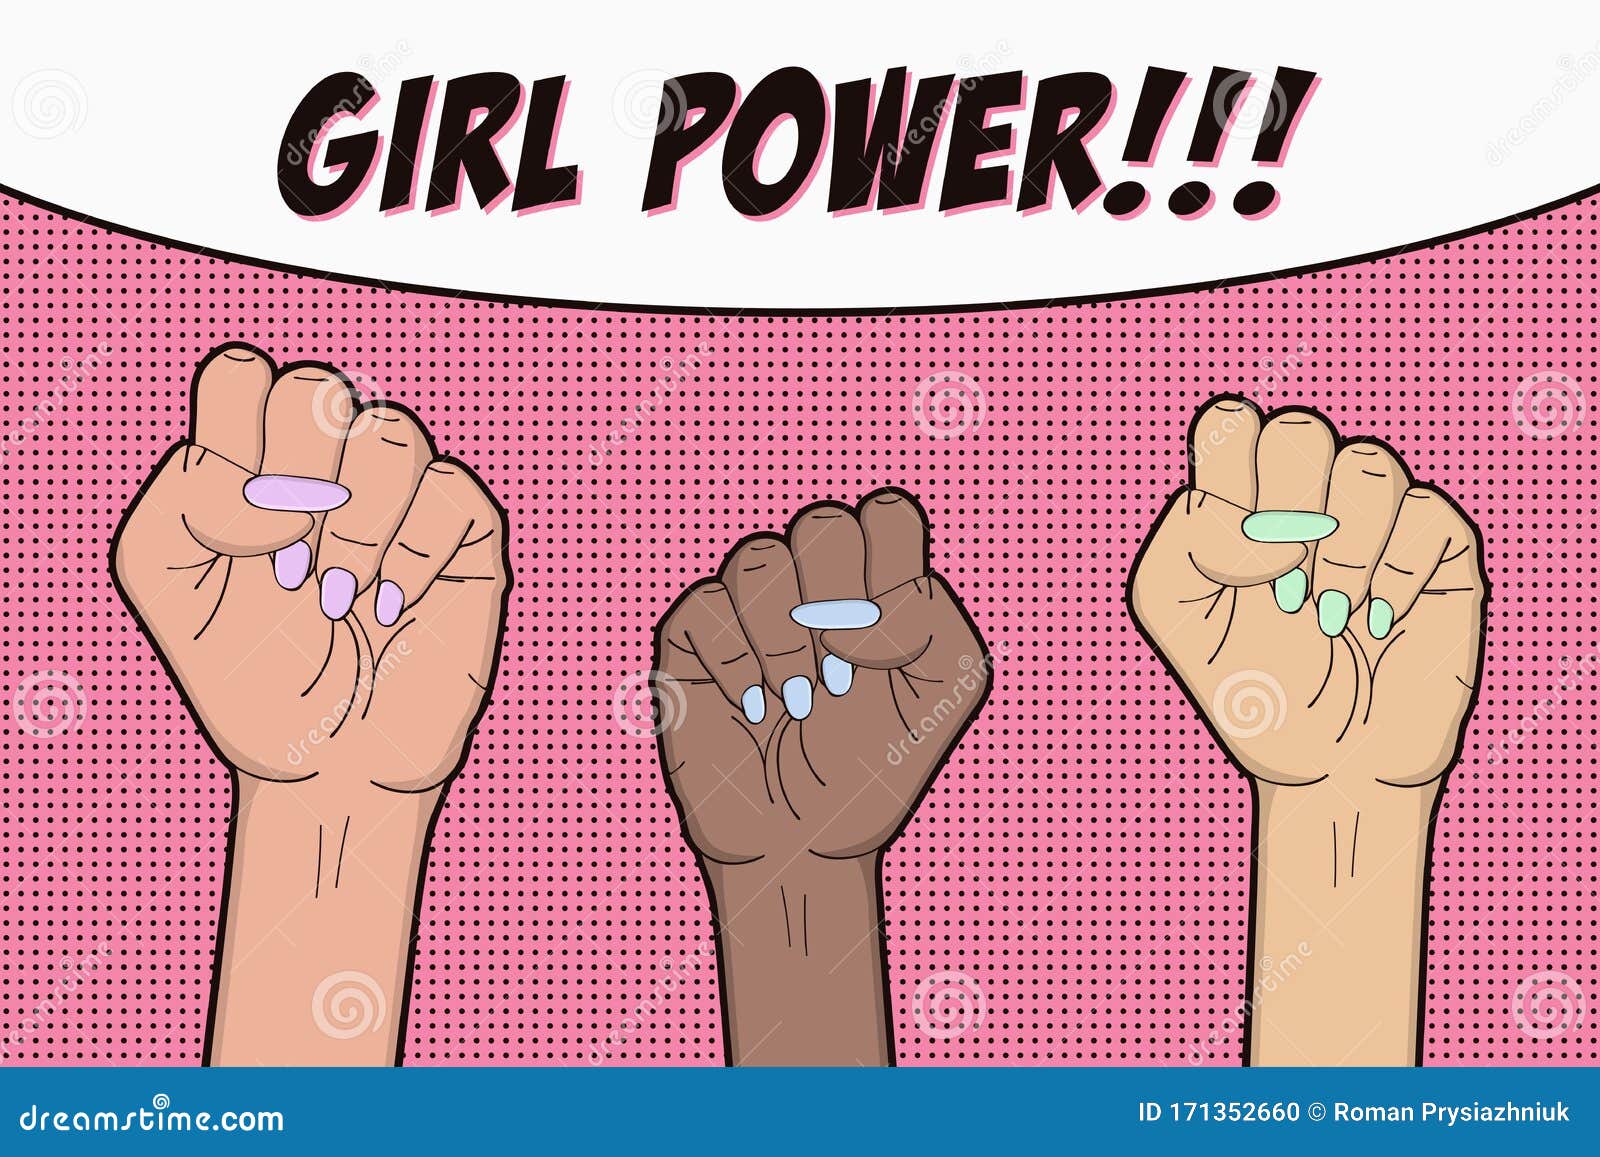 Women S March. Female Hand with Her Fist Raised Up. Girl Power Stock Vector  - Illustration of protest, international: 114747646